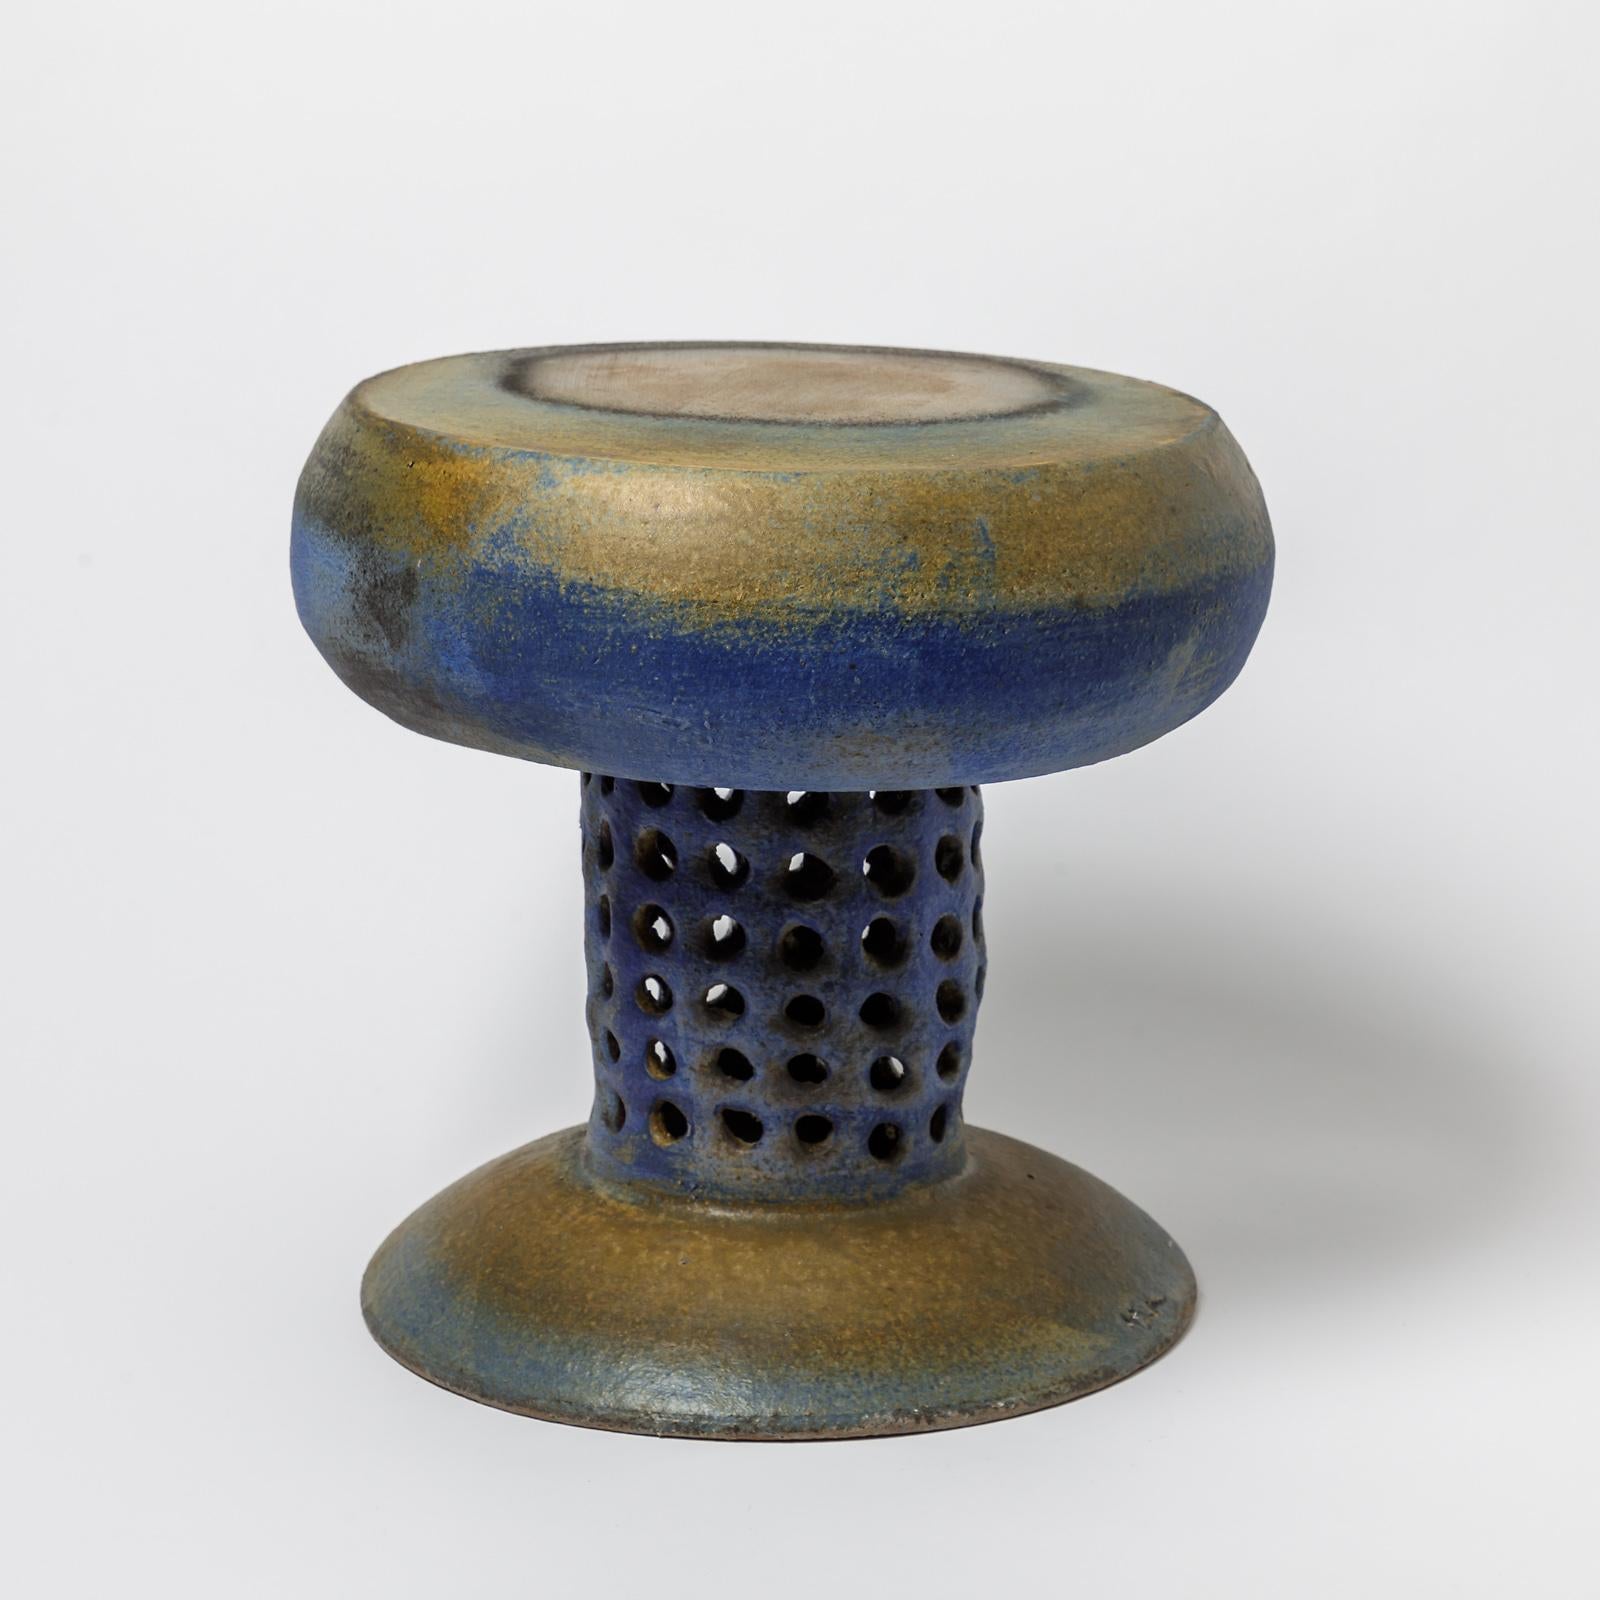 Beaux Arts Ceramic Stool or Table with Glazes Decoration by Mia Jensen, circa 2021